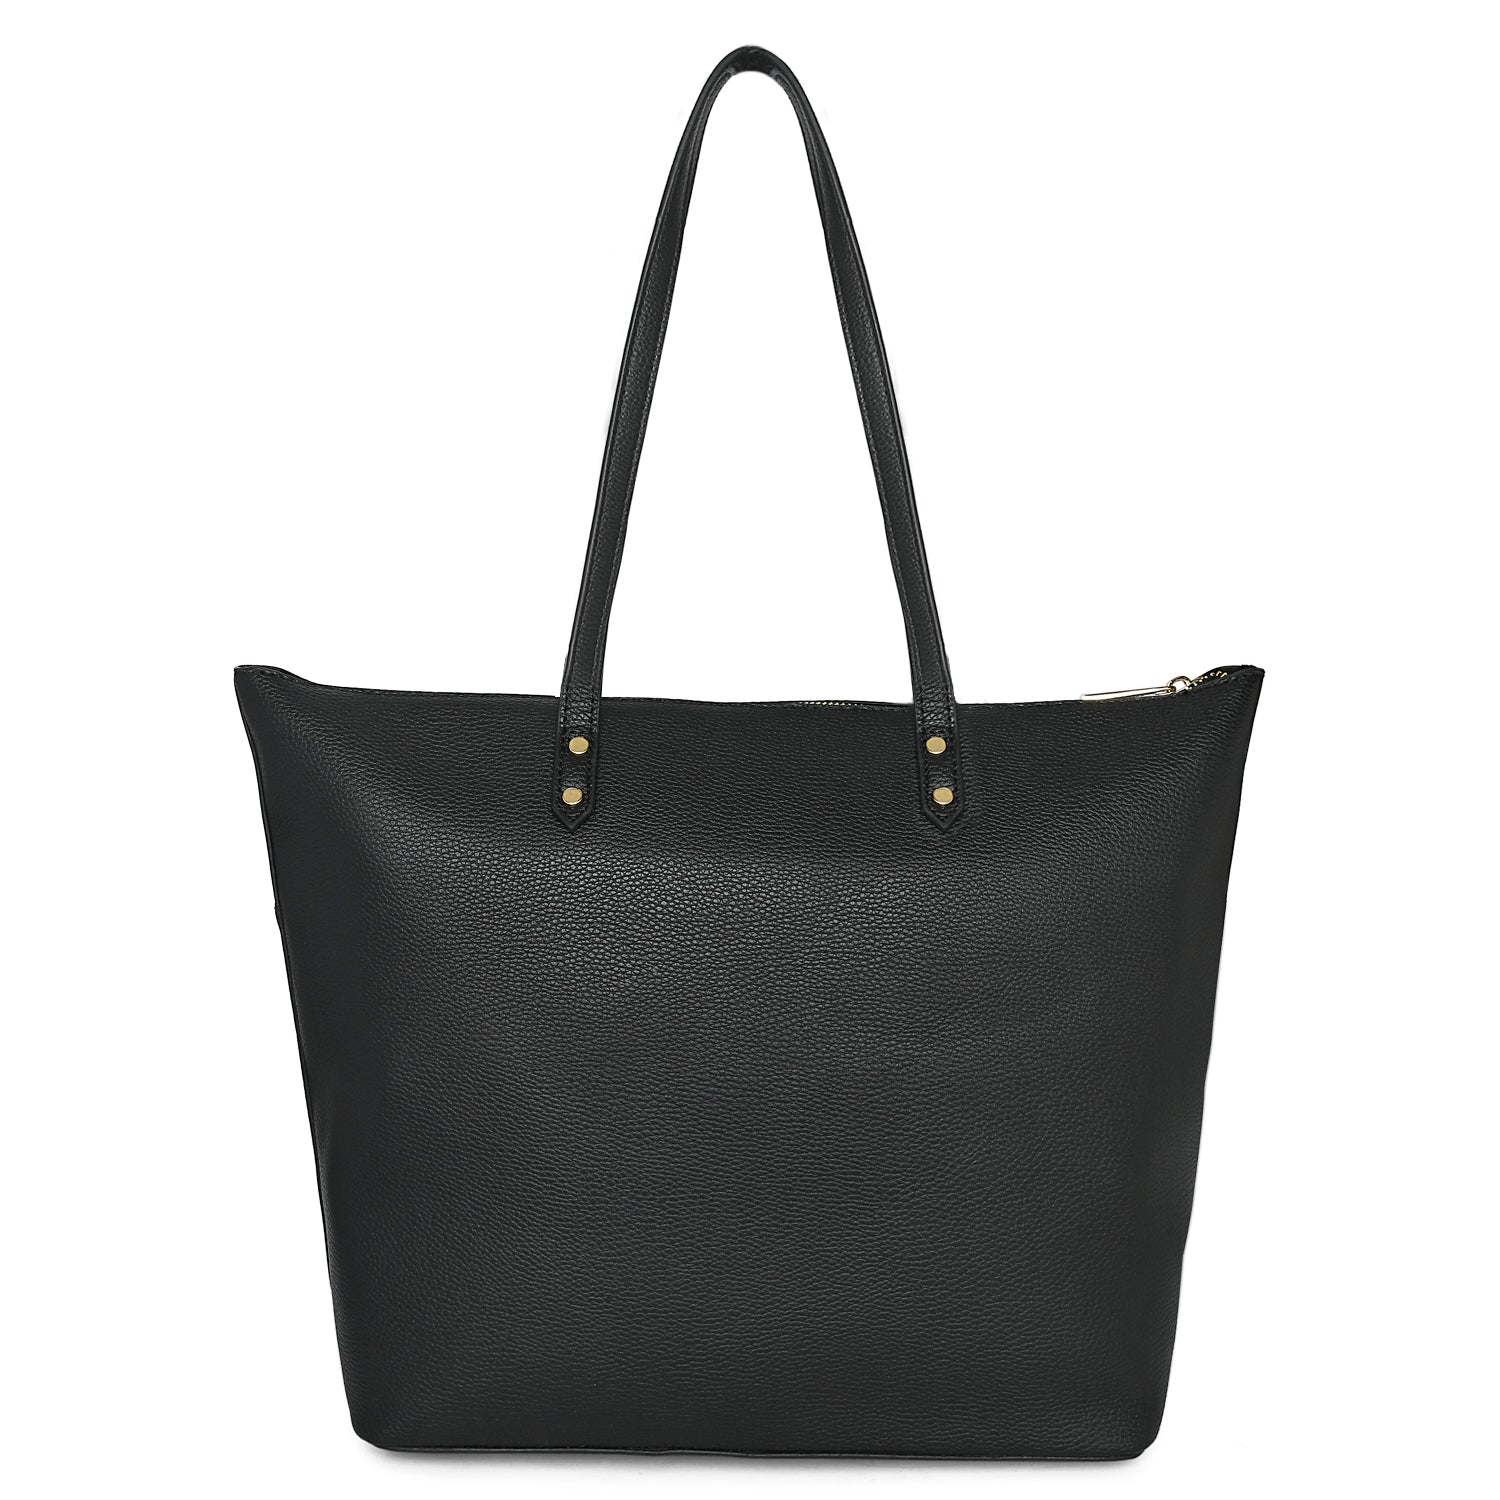 Accessorize London Women's Faux Leather Black Front Pocket Molly Tote bag